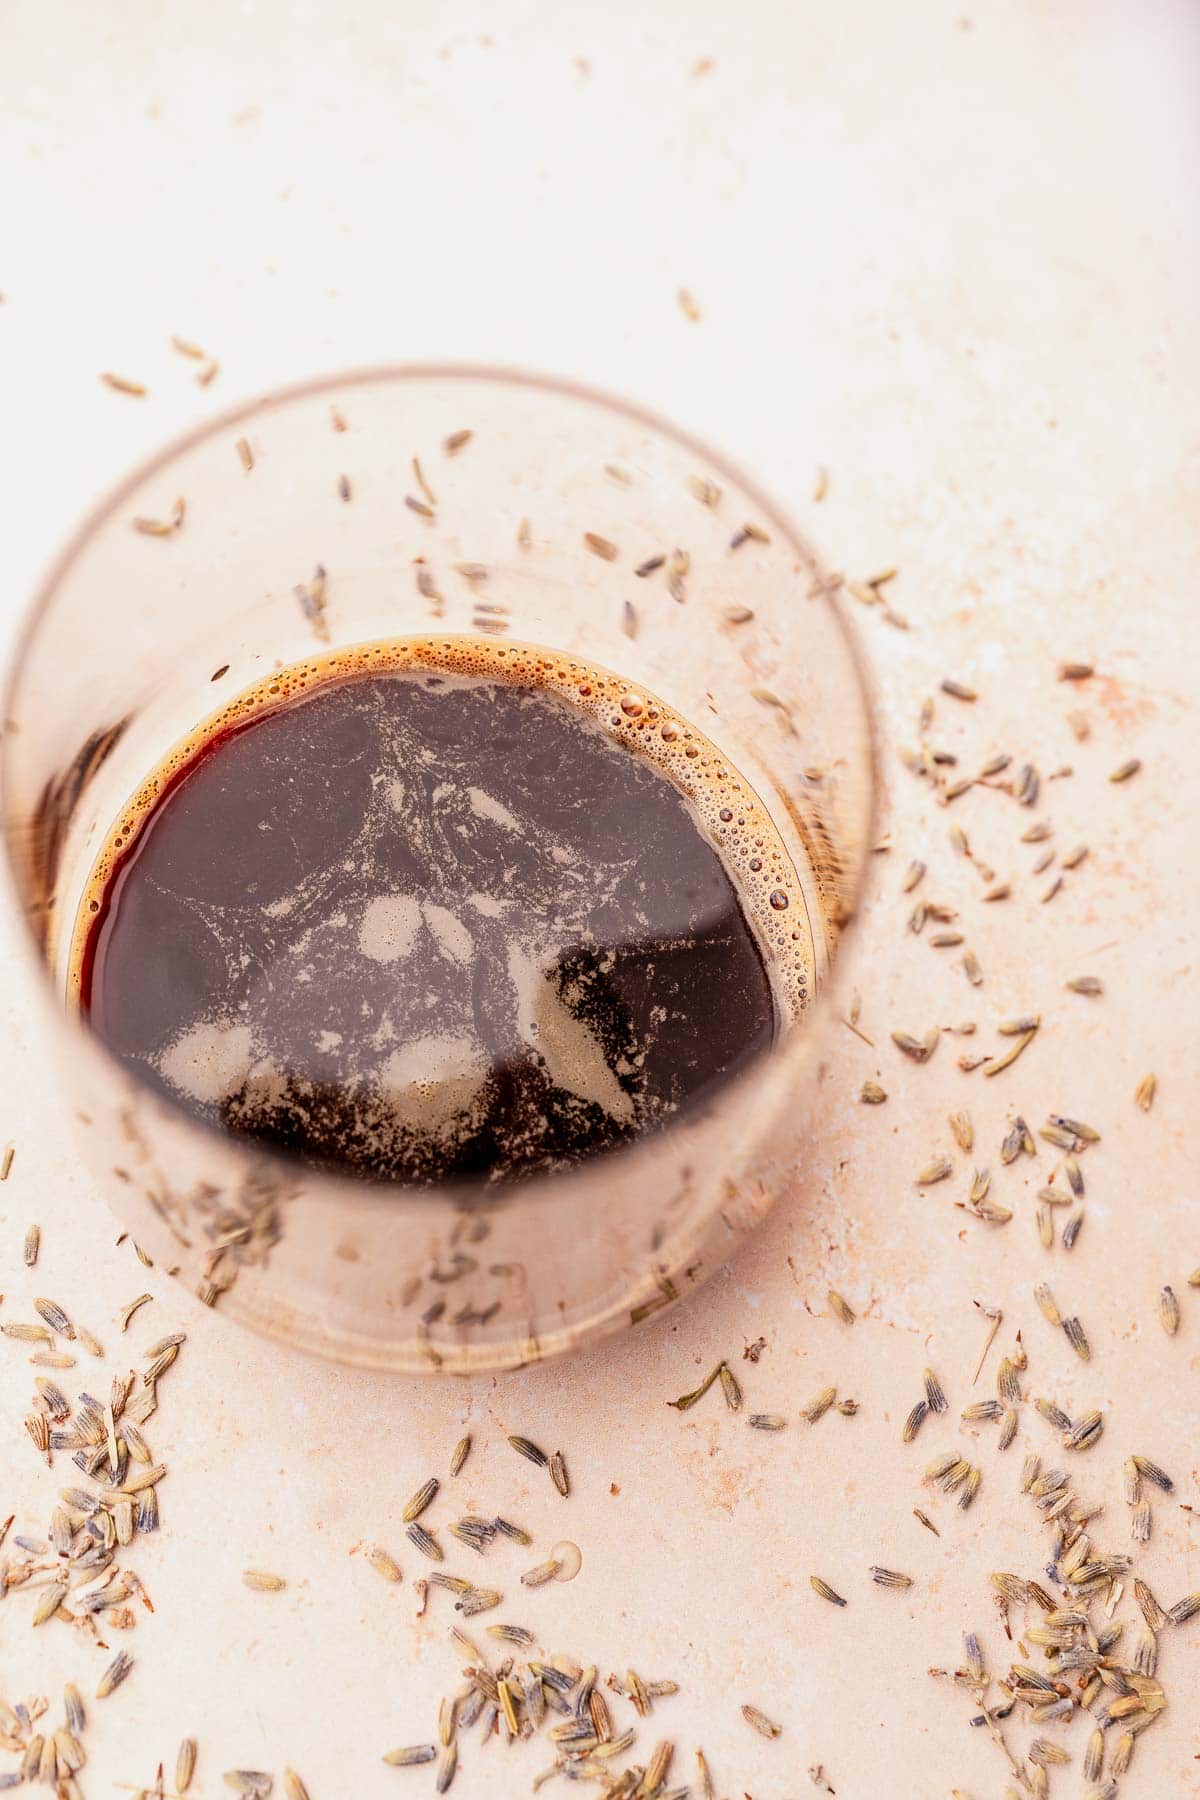 A glass of dark beer with foam on top surrounded by scattered grains on a light surface.